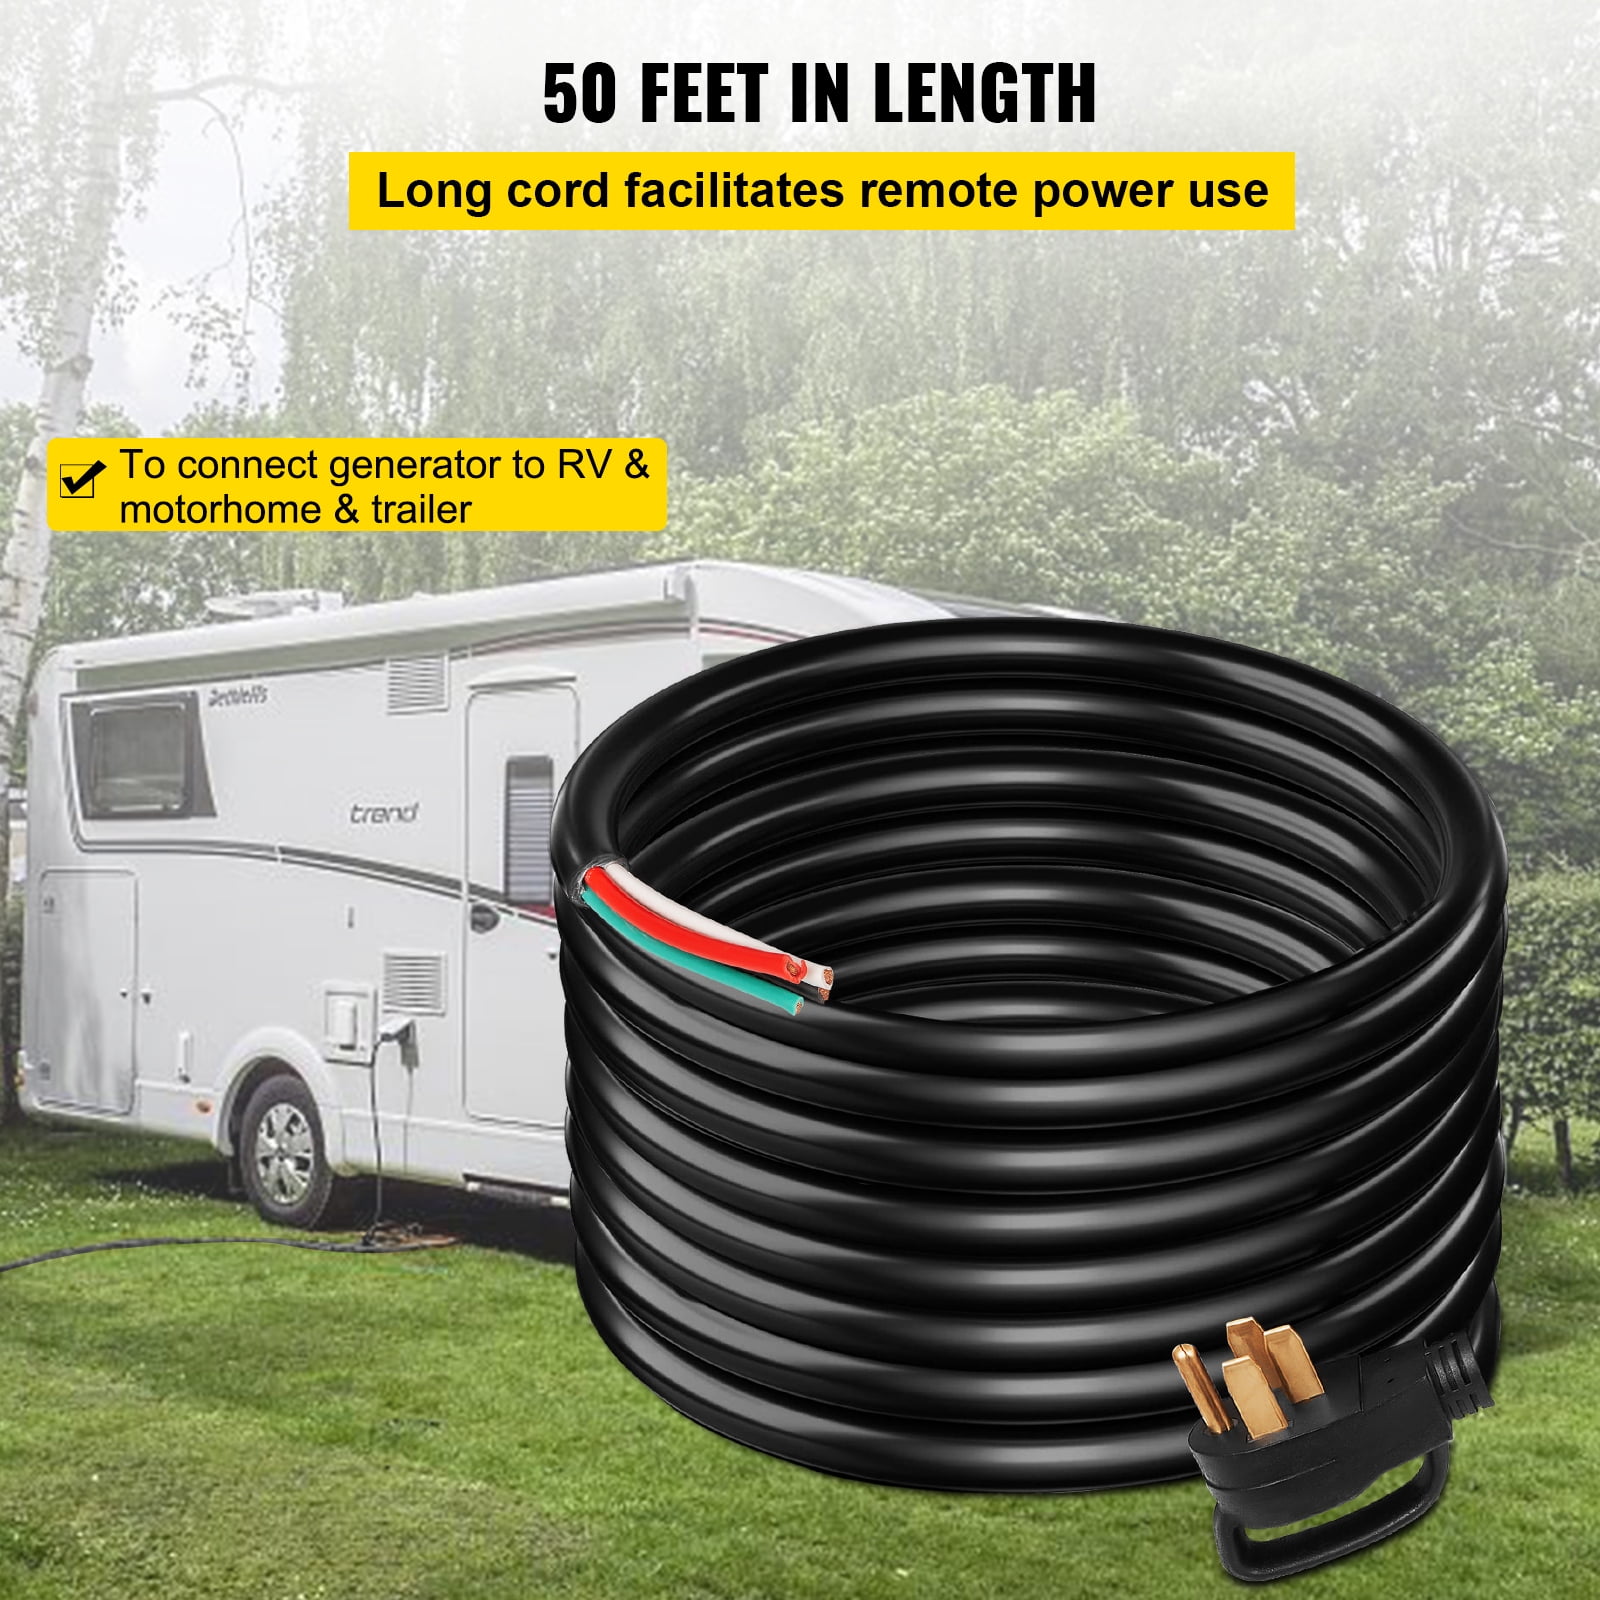 VEVOR RV Extension Cord 50ft 50Amp STW 6/3+8/1 Electrical Power